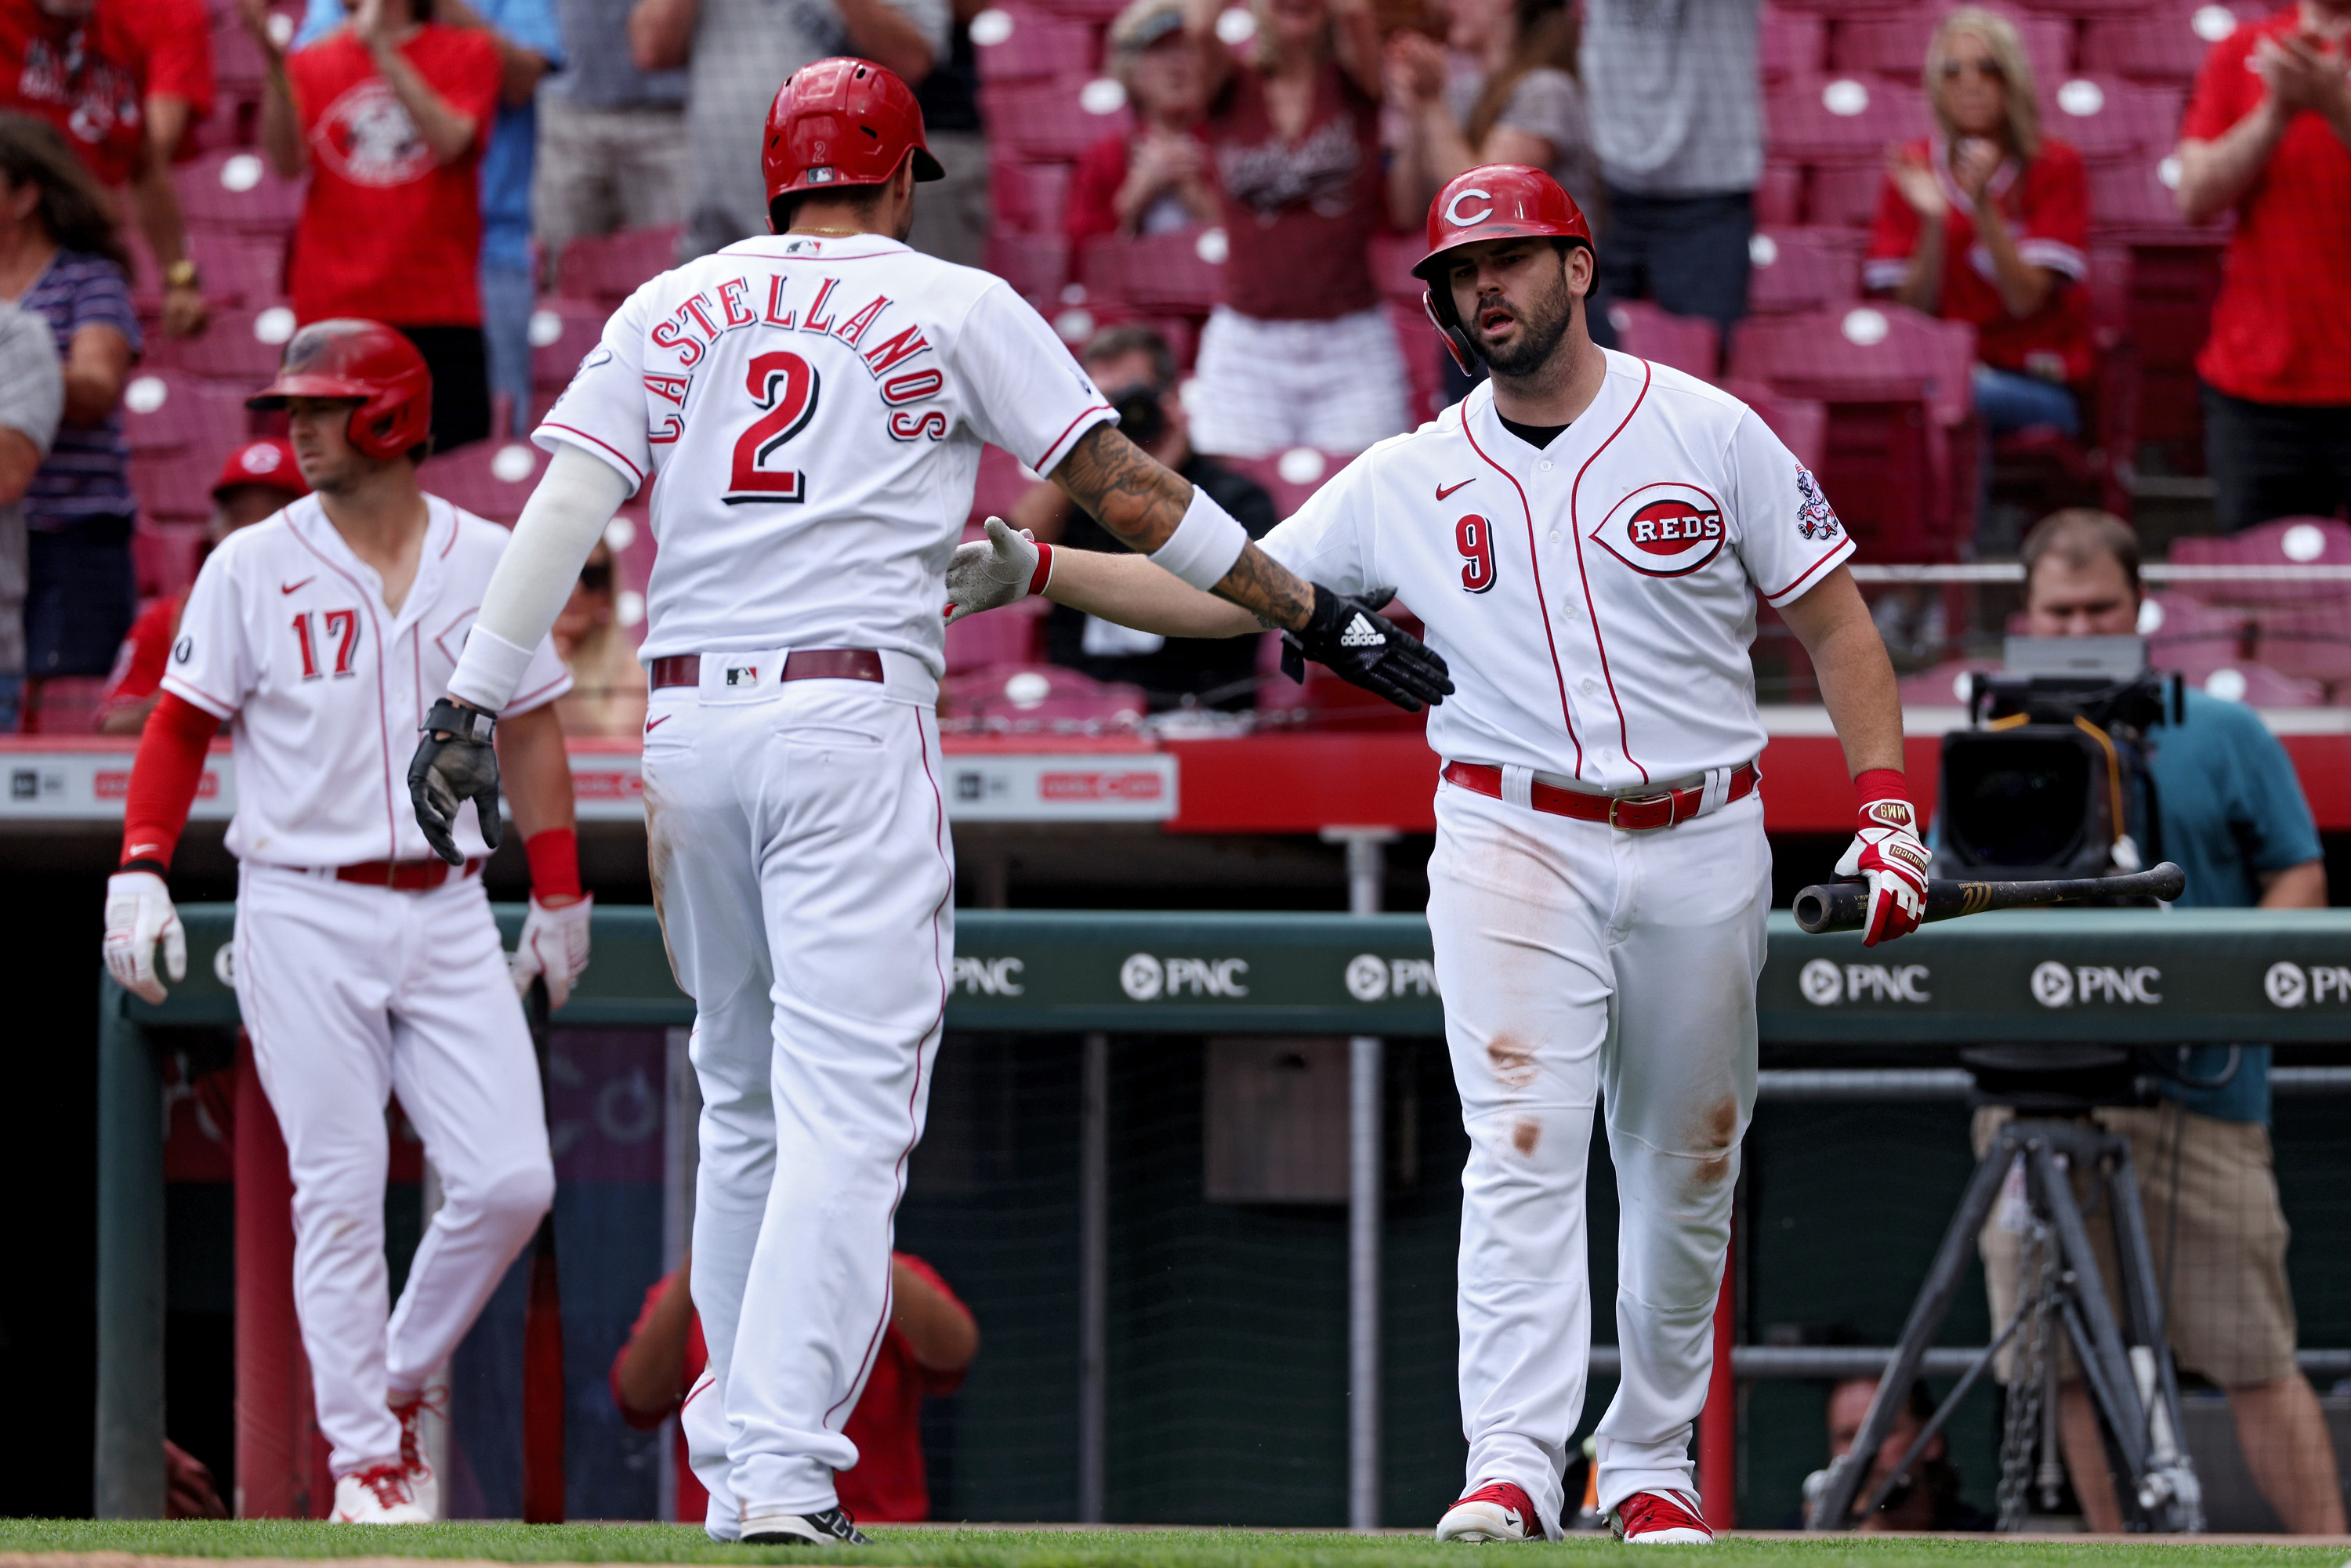 Reds close gap on Cardinals with 10th inning win